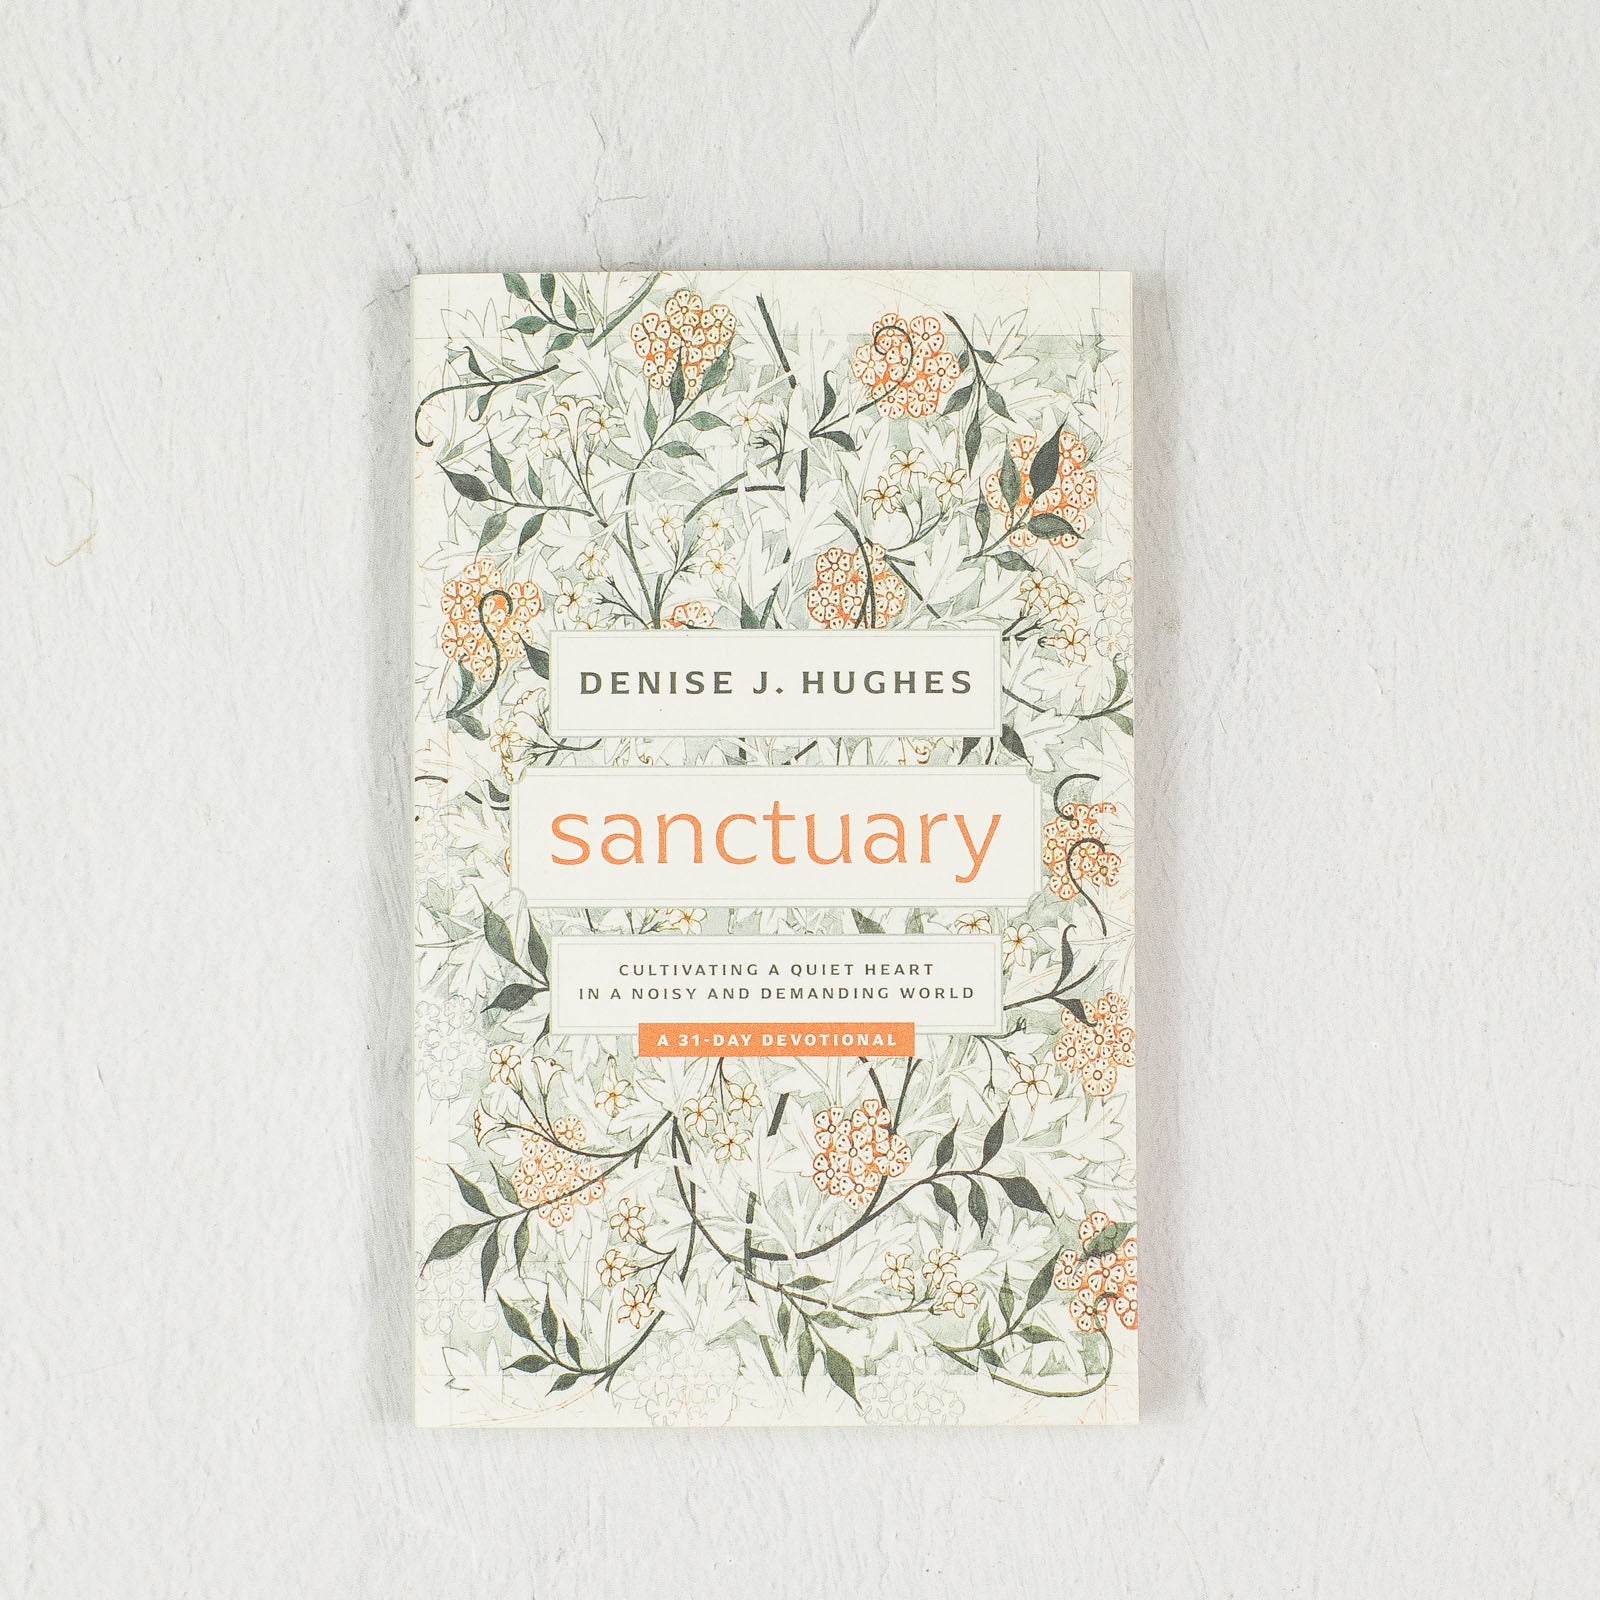 Sanctuary: Cultivating a Quiet Heart in a Noisy and Demanding World